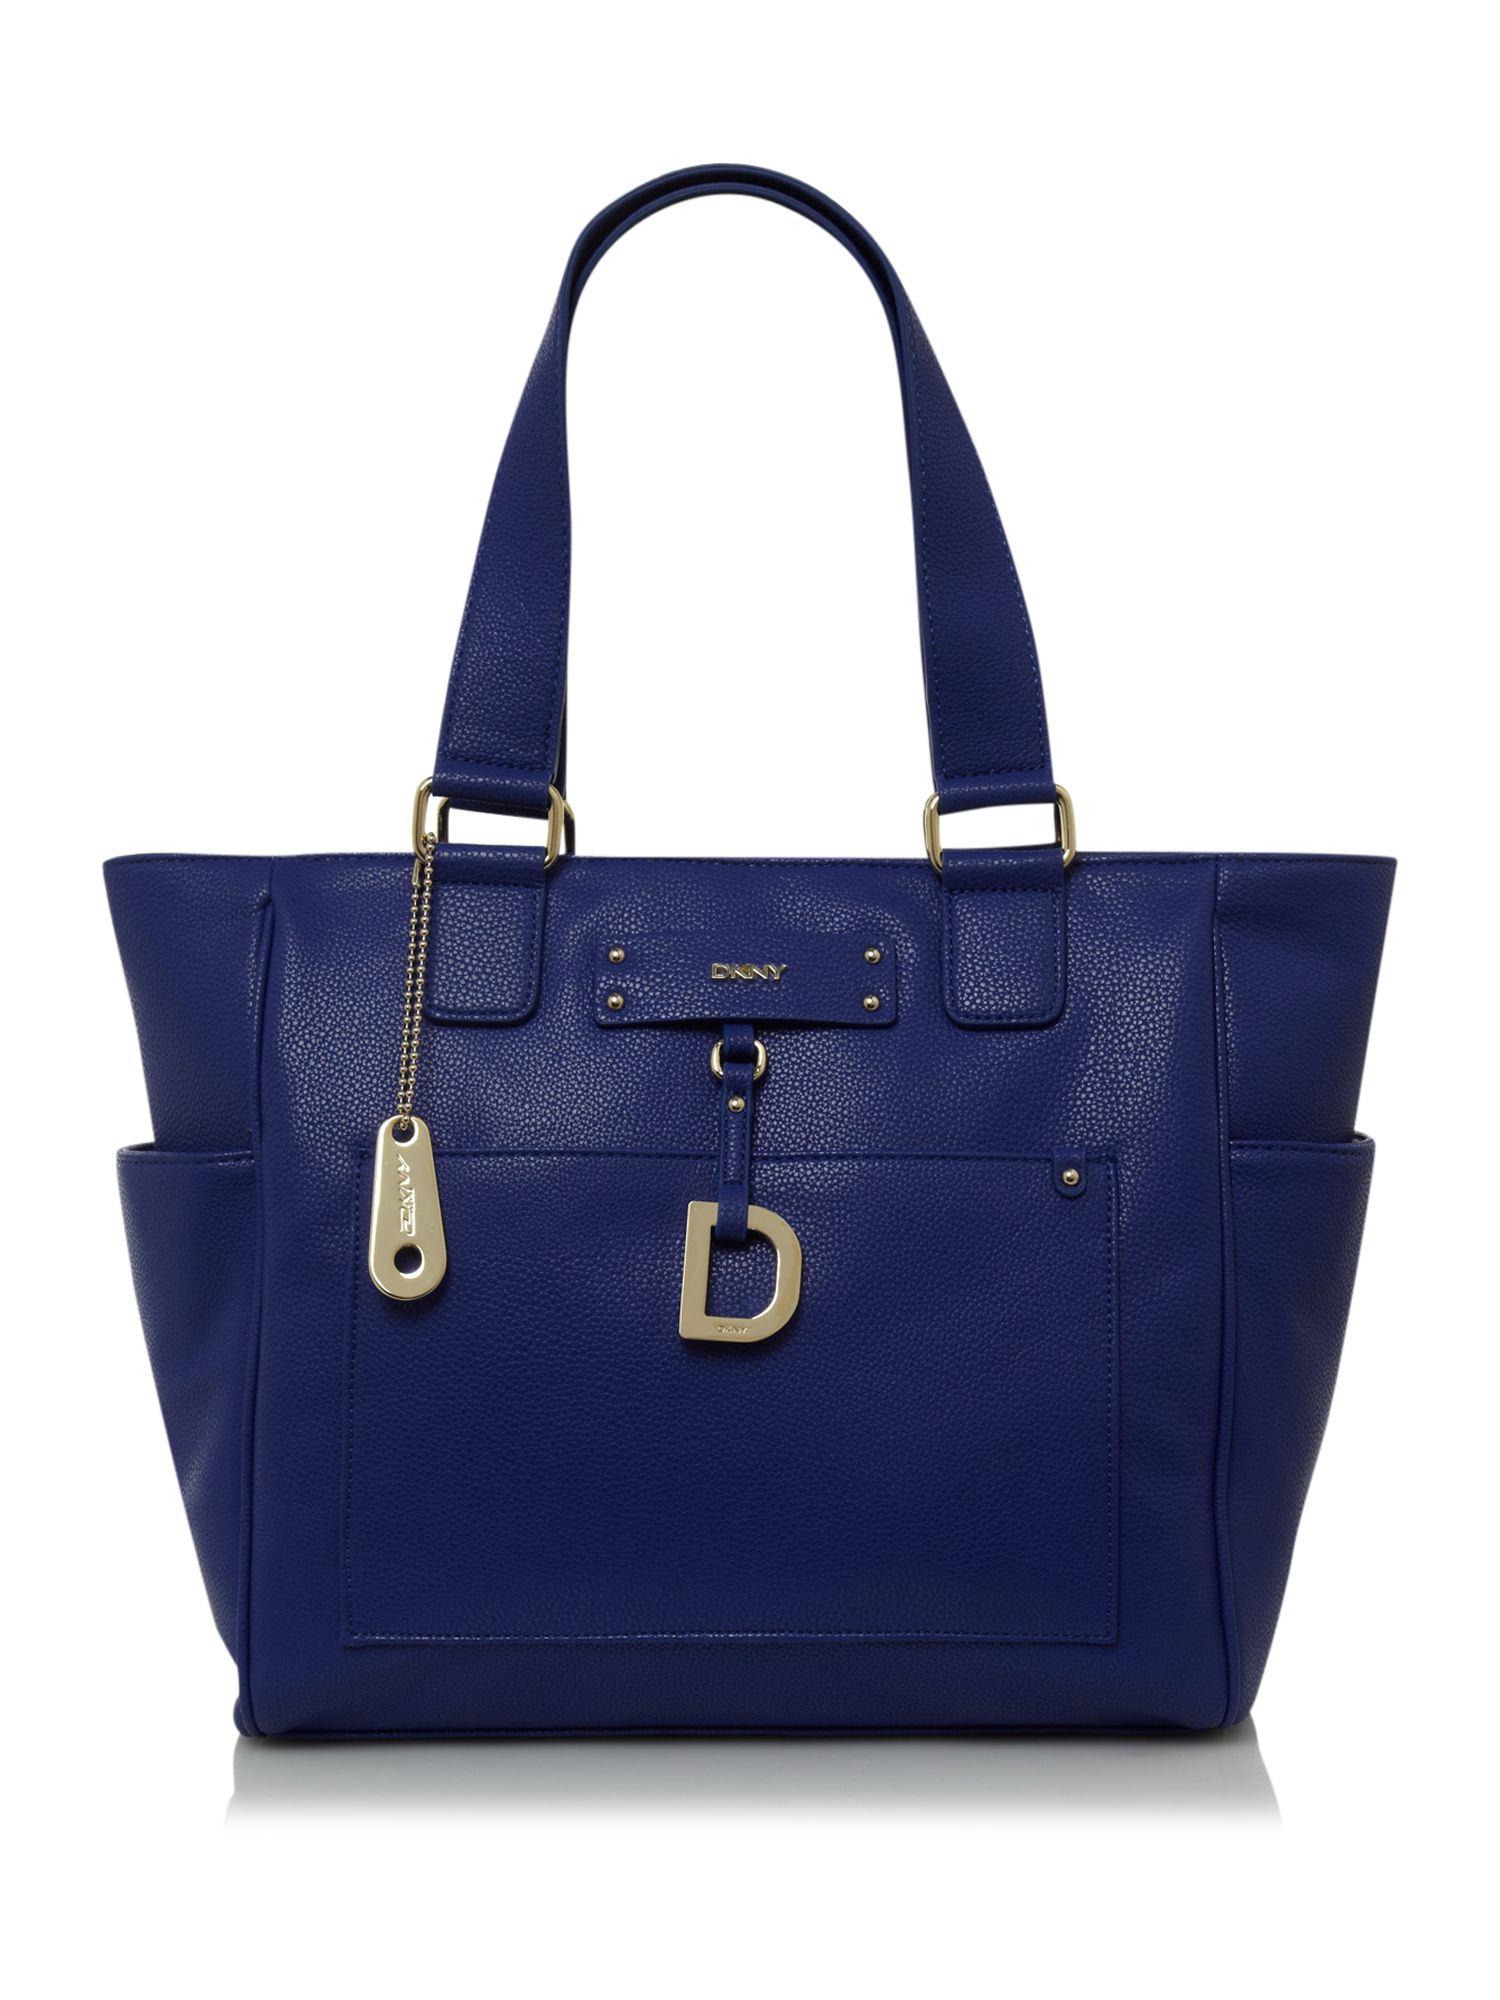 Dkny D Charm Large Tote Bag in Blue | Lyst